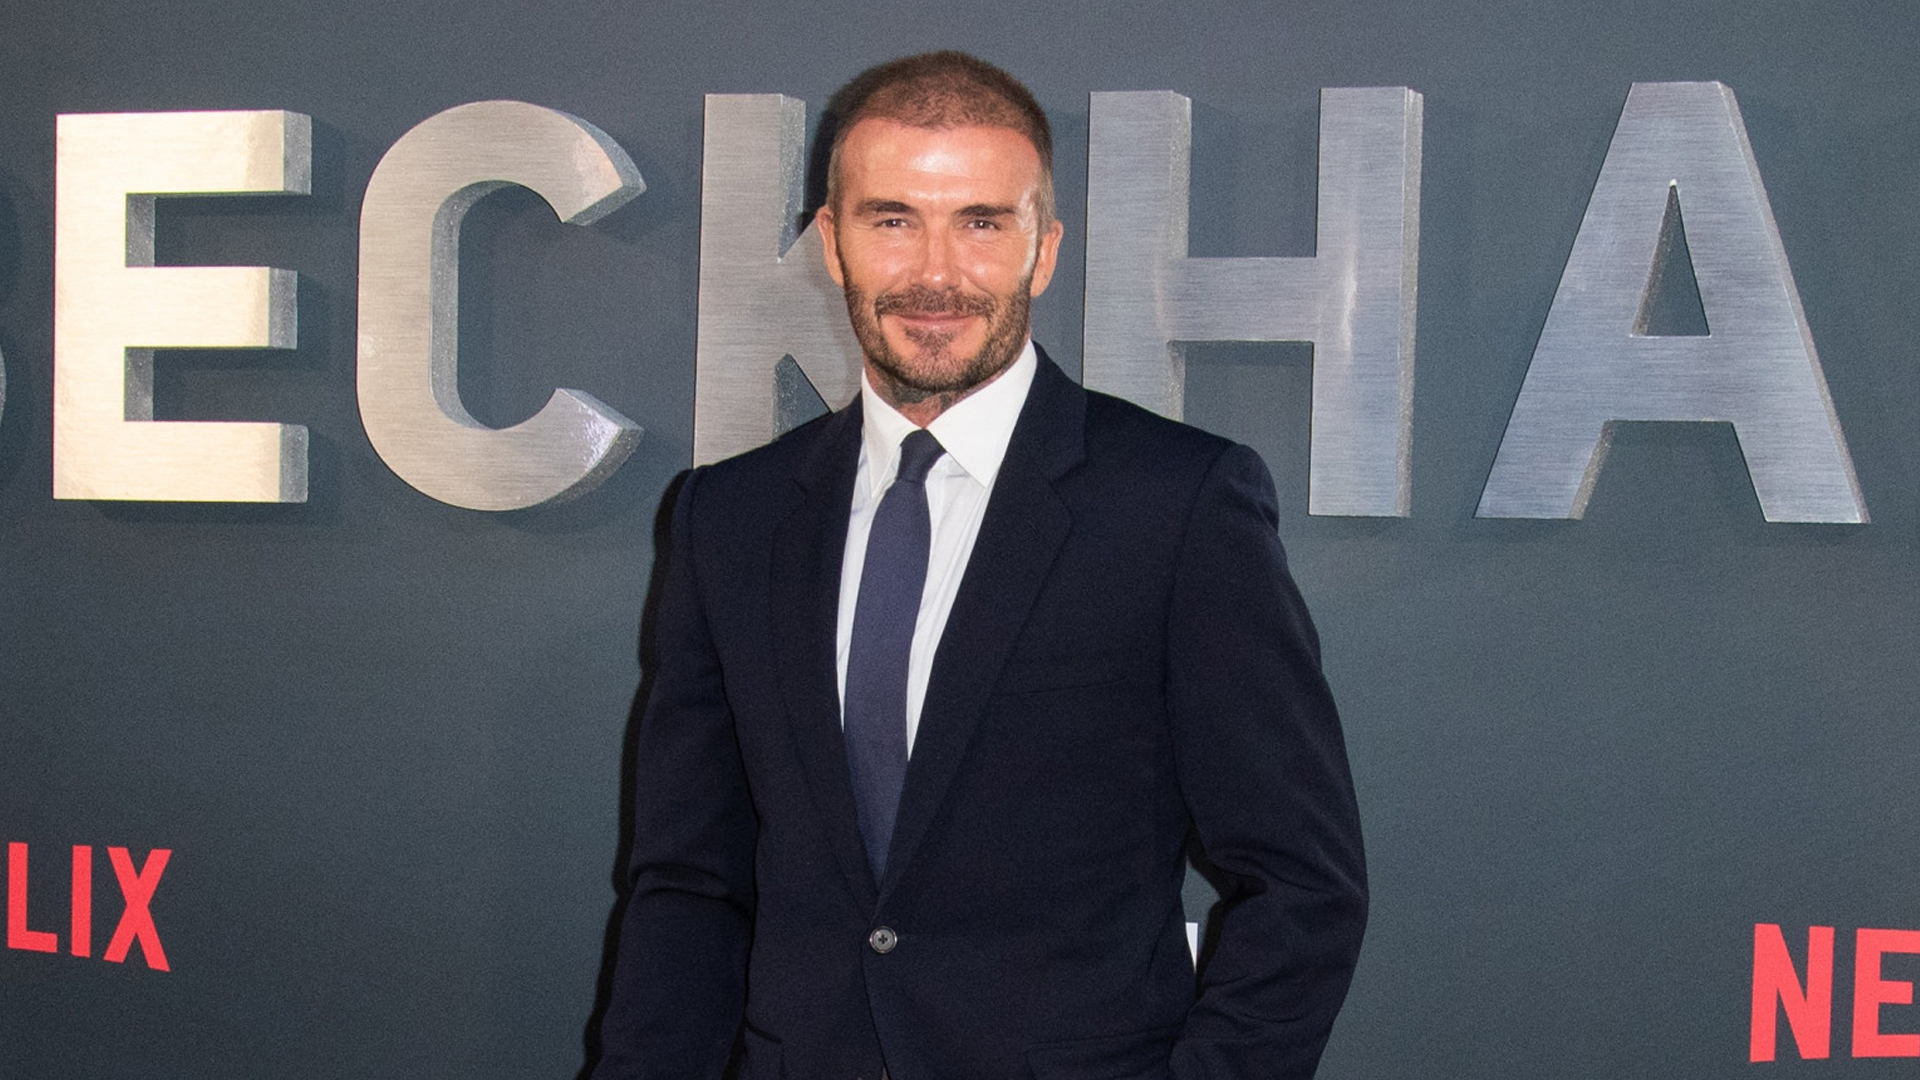 Is it just me who noticed David Beckham's suit looks VERY well